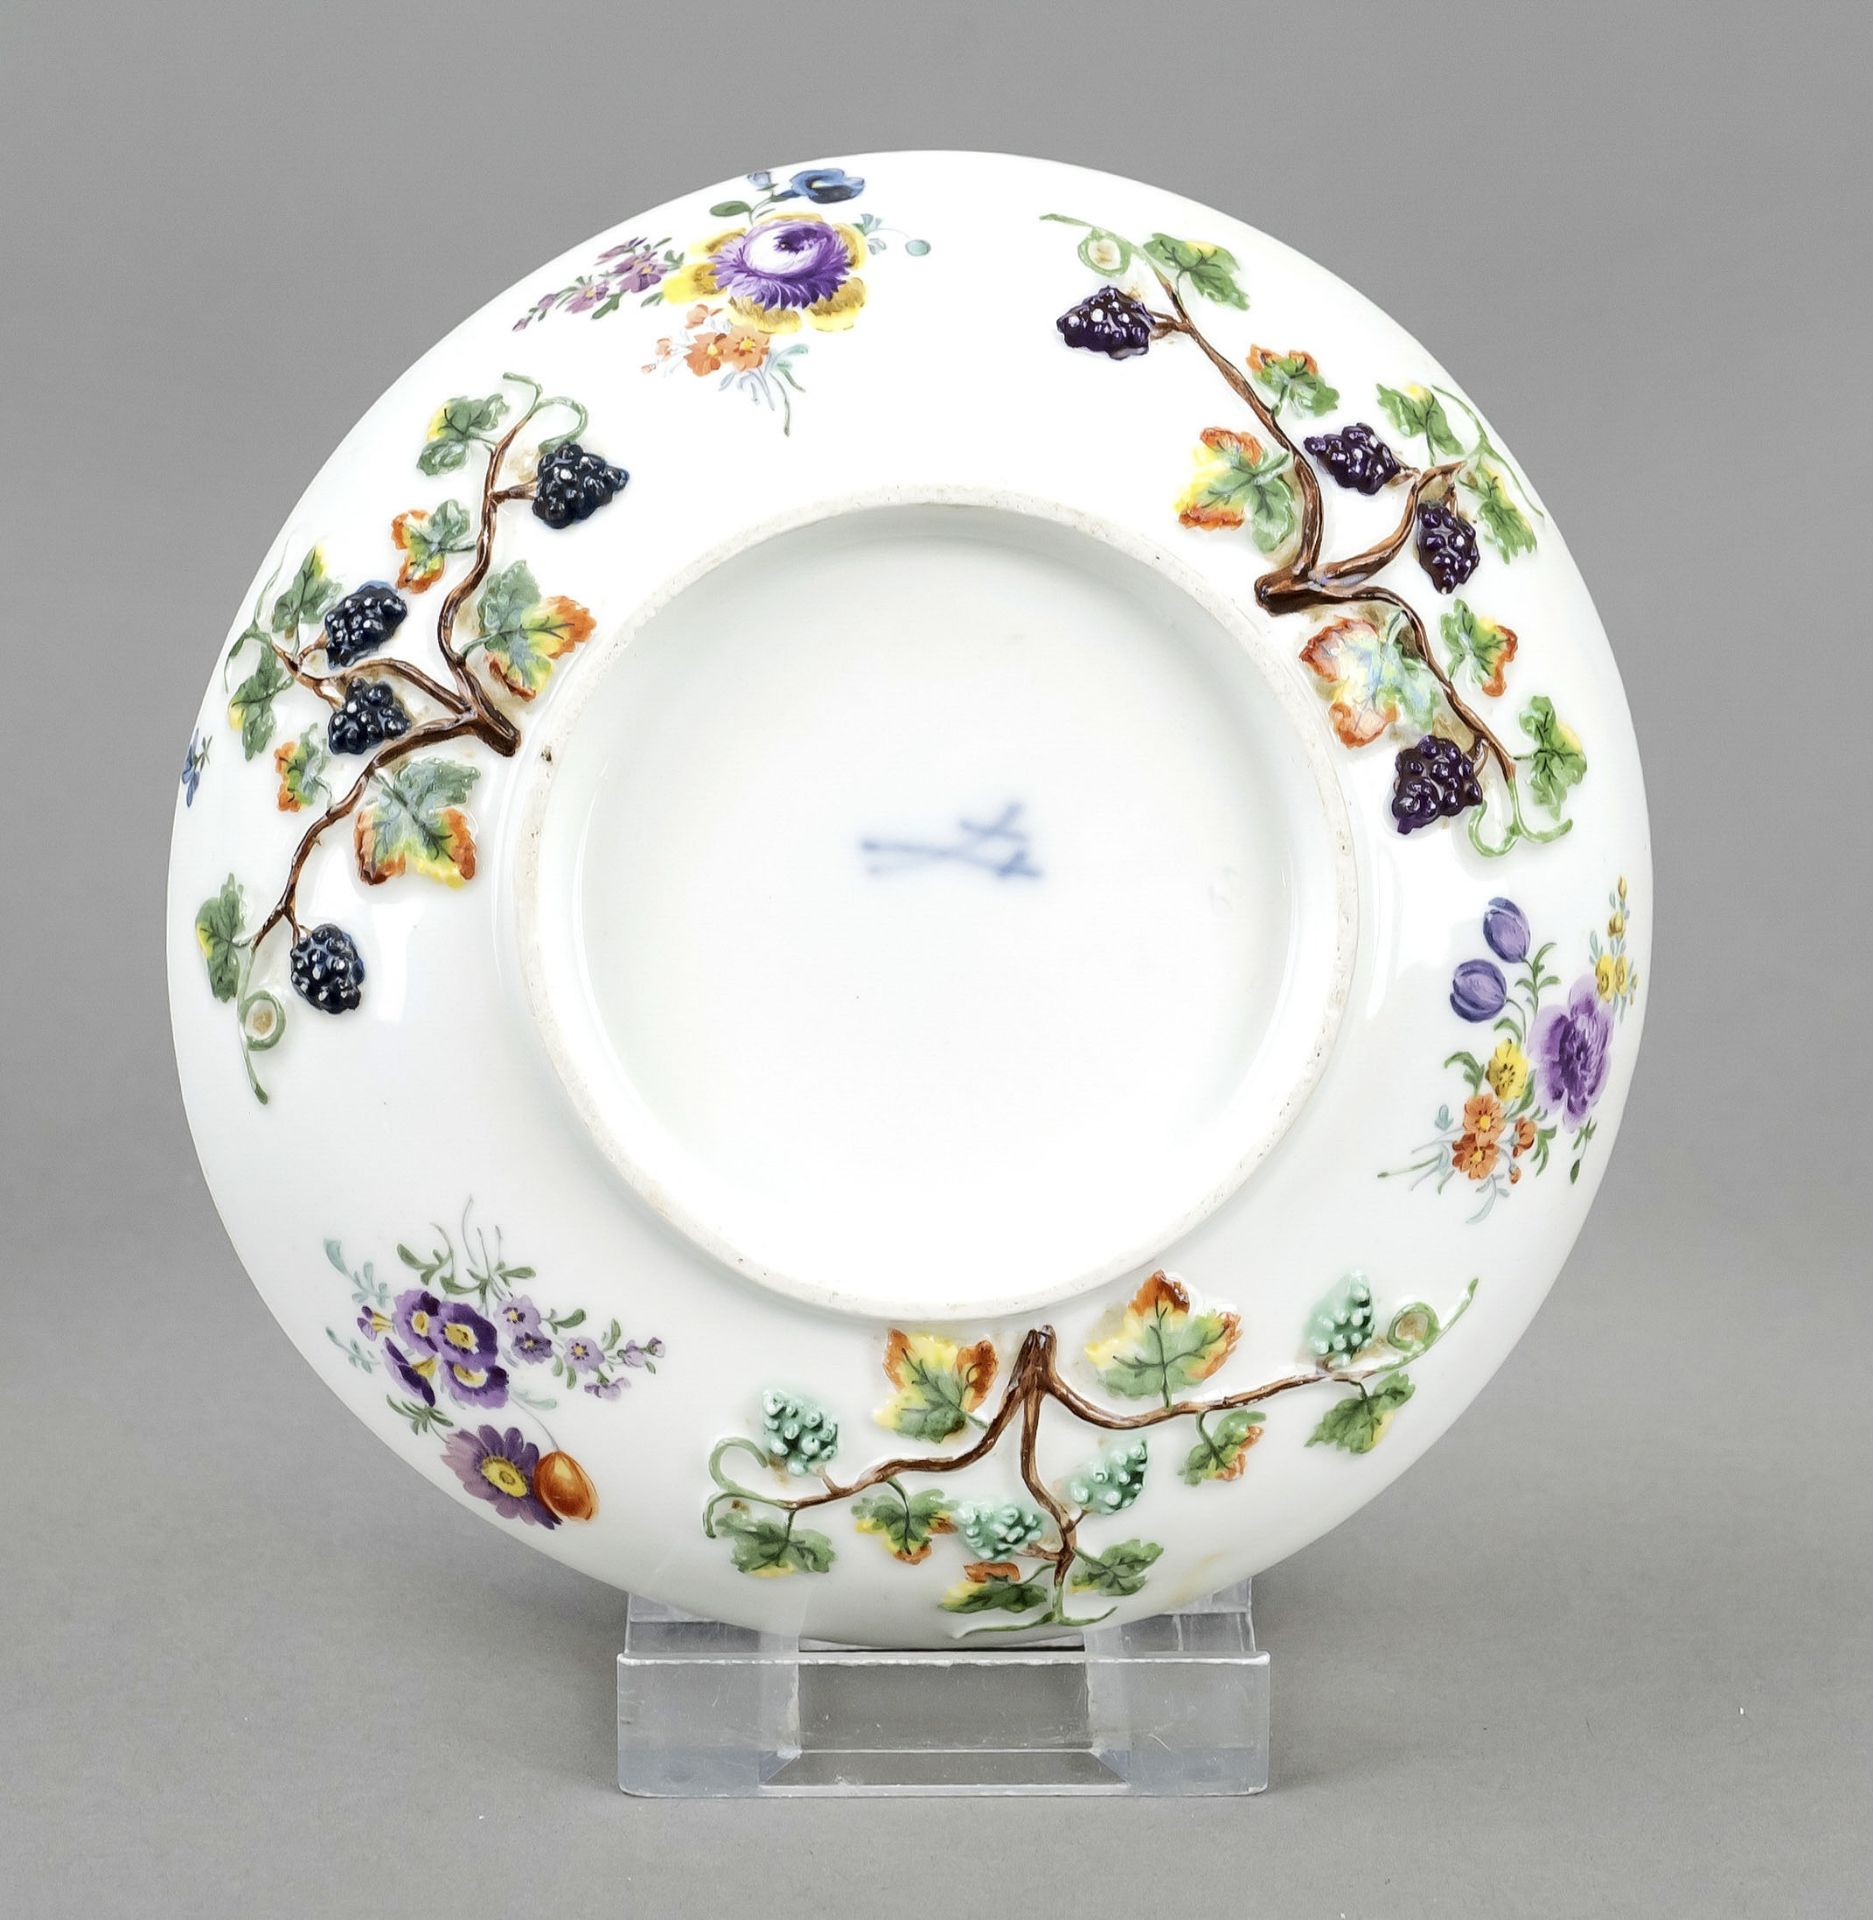 Bowl, Meissen, 1st half 19th century, polychrome painted with bouquet of flowers, chestnuts, oranges - Image 2 of 2